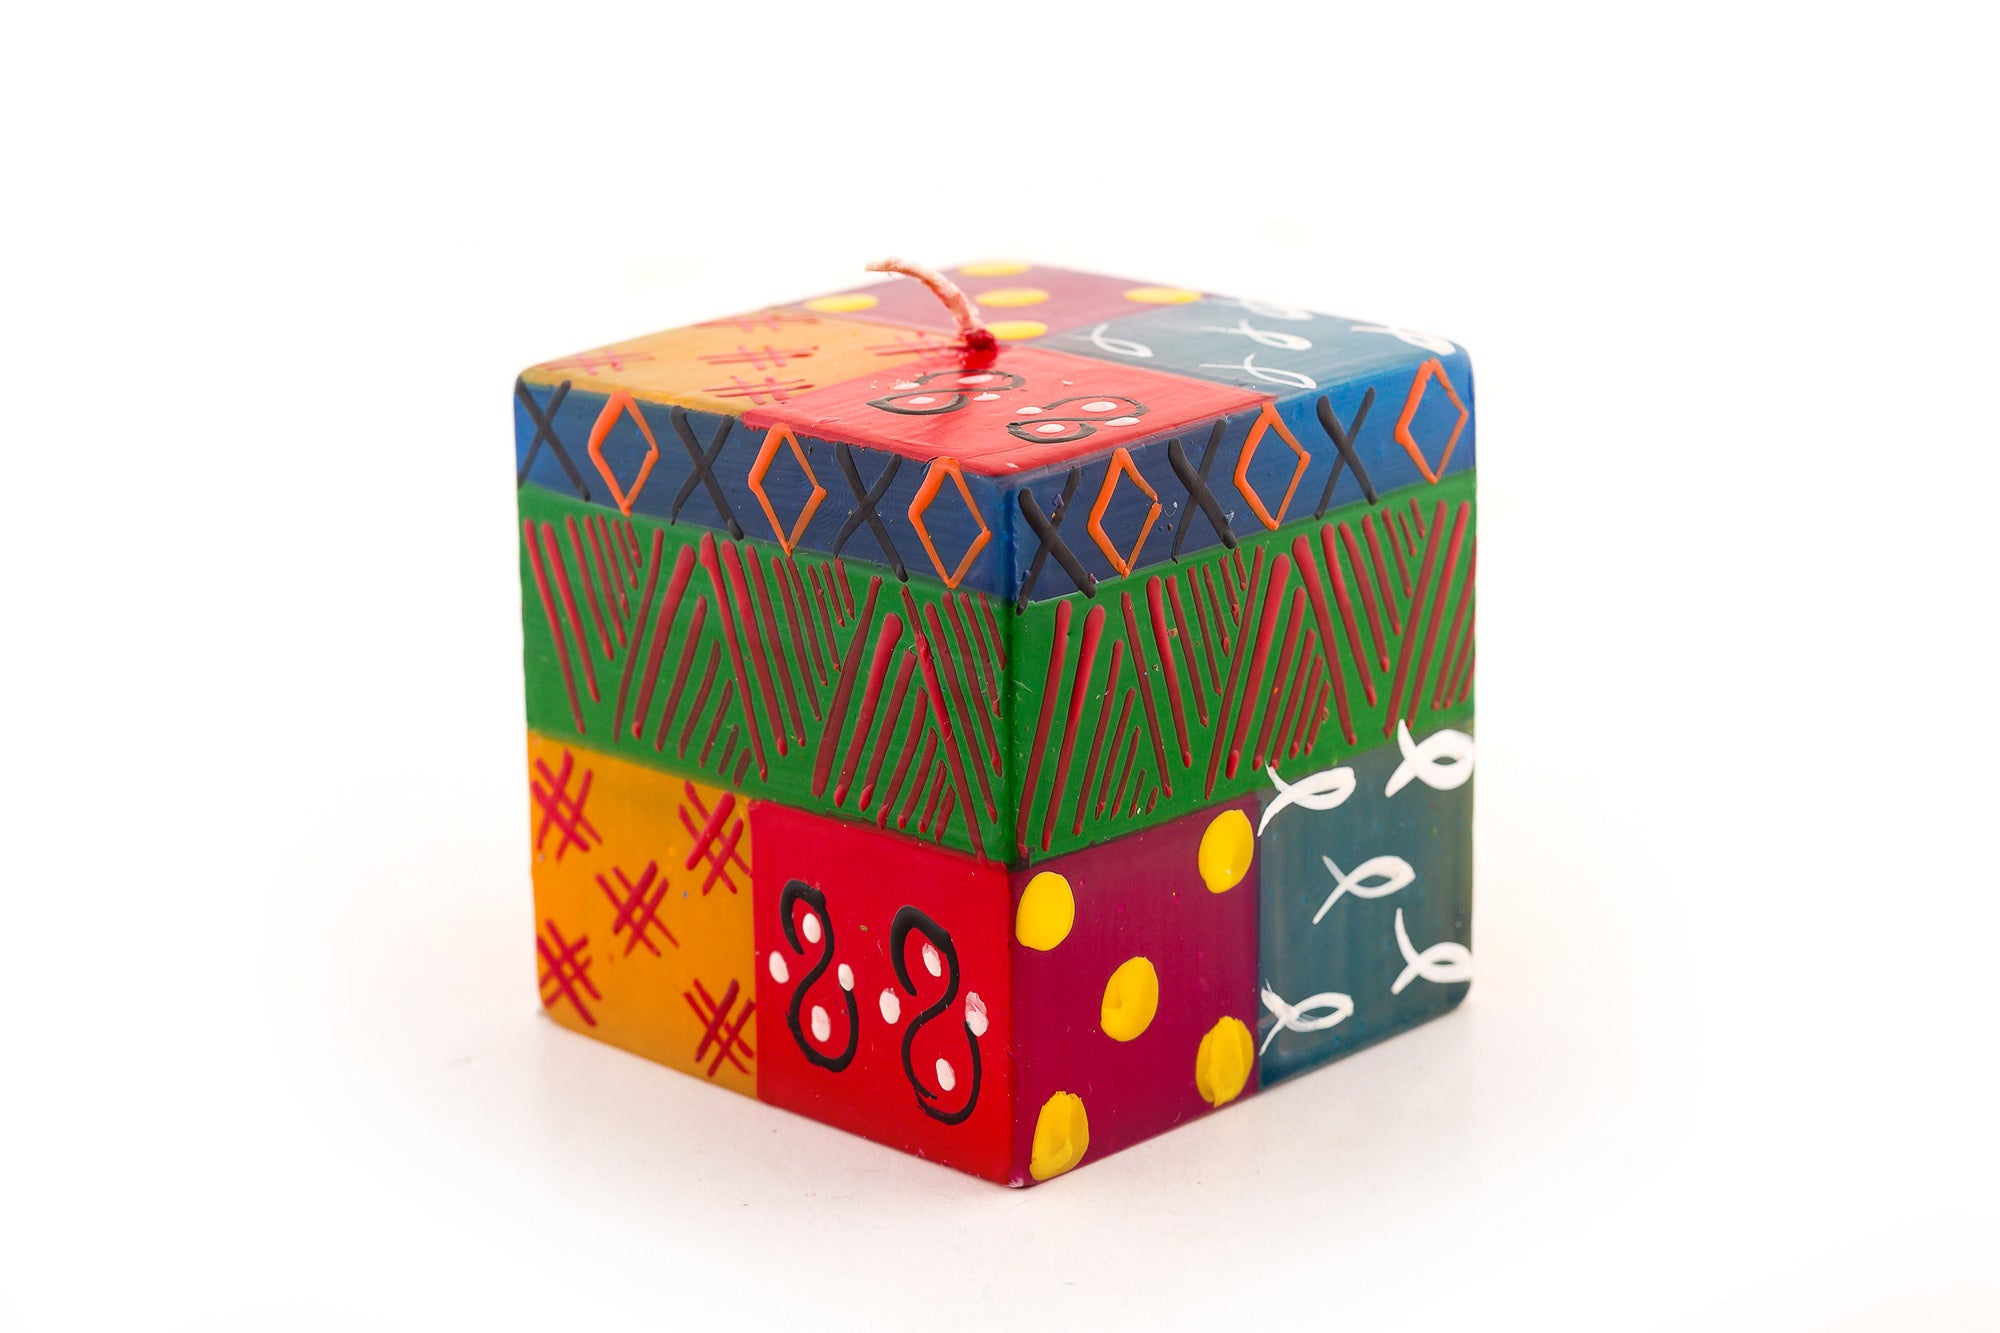 Multicolor Ethnic 3x3x3 cube candle. Bright, colorful, sunshine and fun designs that sing out Africa!